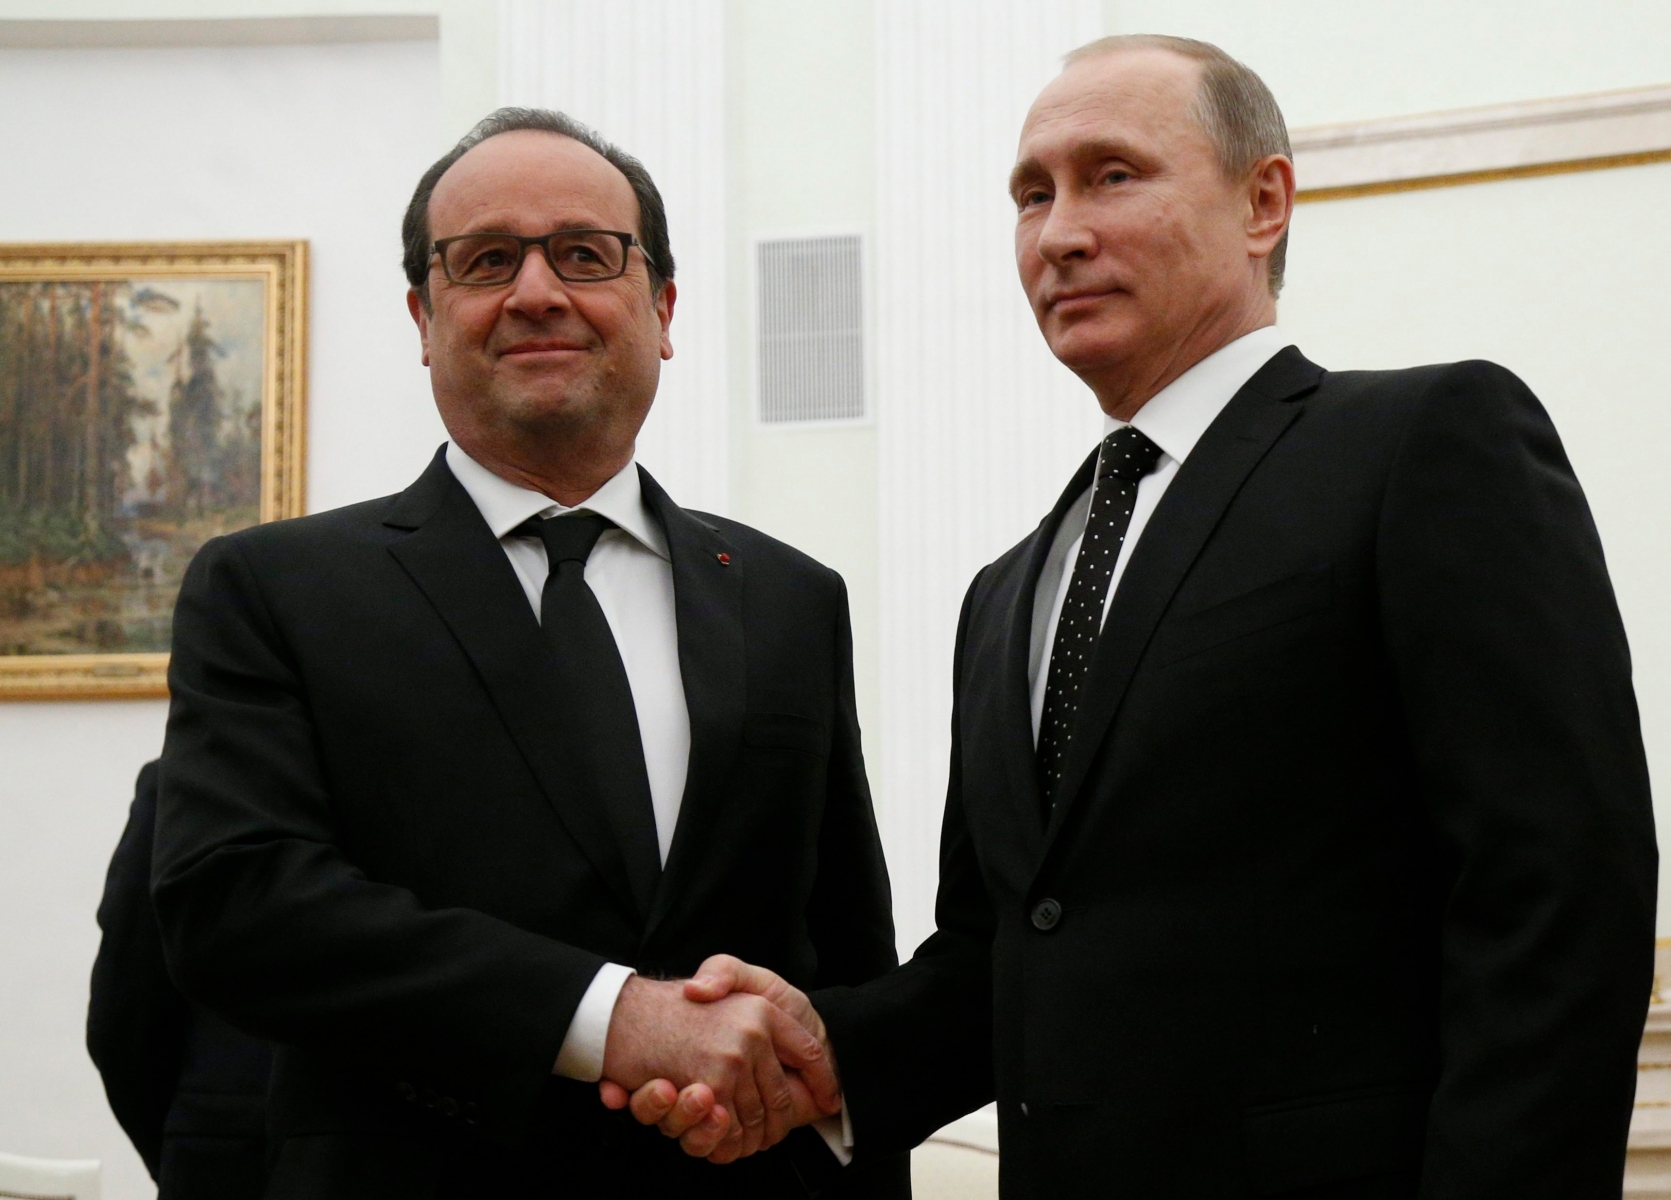 epa05043029 Russian President Vladimir Putin (R) shakes hands with French President Francois Hollande (L), during their meeting in Moscow, Russia, 26 November 2015. Francois Hollande arrived in Moscow to discuss coordination in their common struggle against so called Islamic State terrorist formation in Syria.  EPA/ALEXANDER ZEMLIANICHENKO / POOL RUSSIA FRANCE HOLLANDE DIPLOMACY